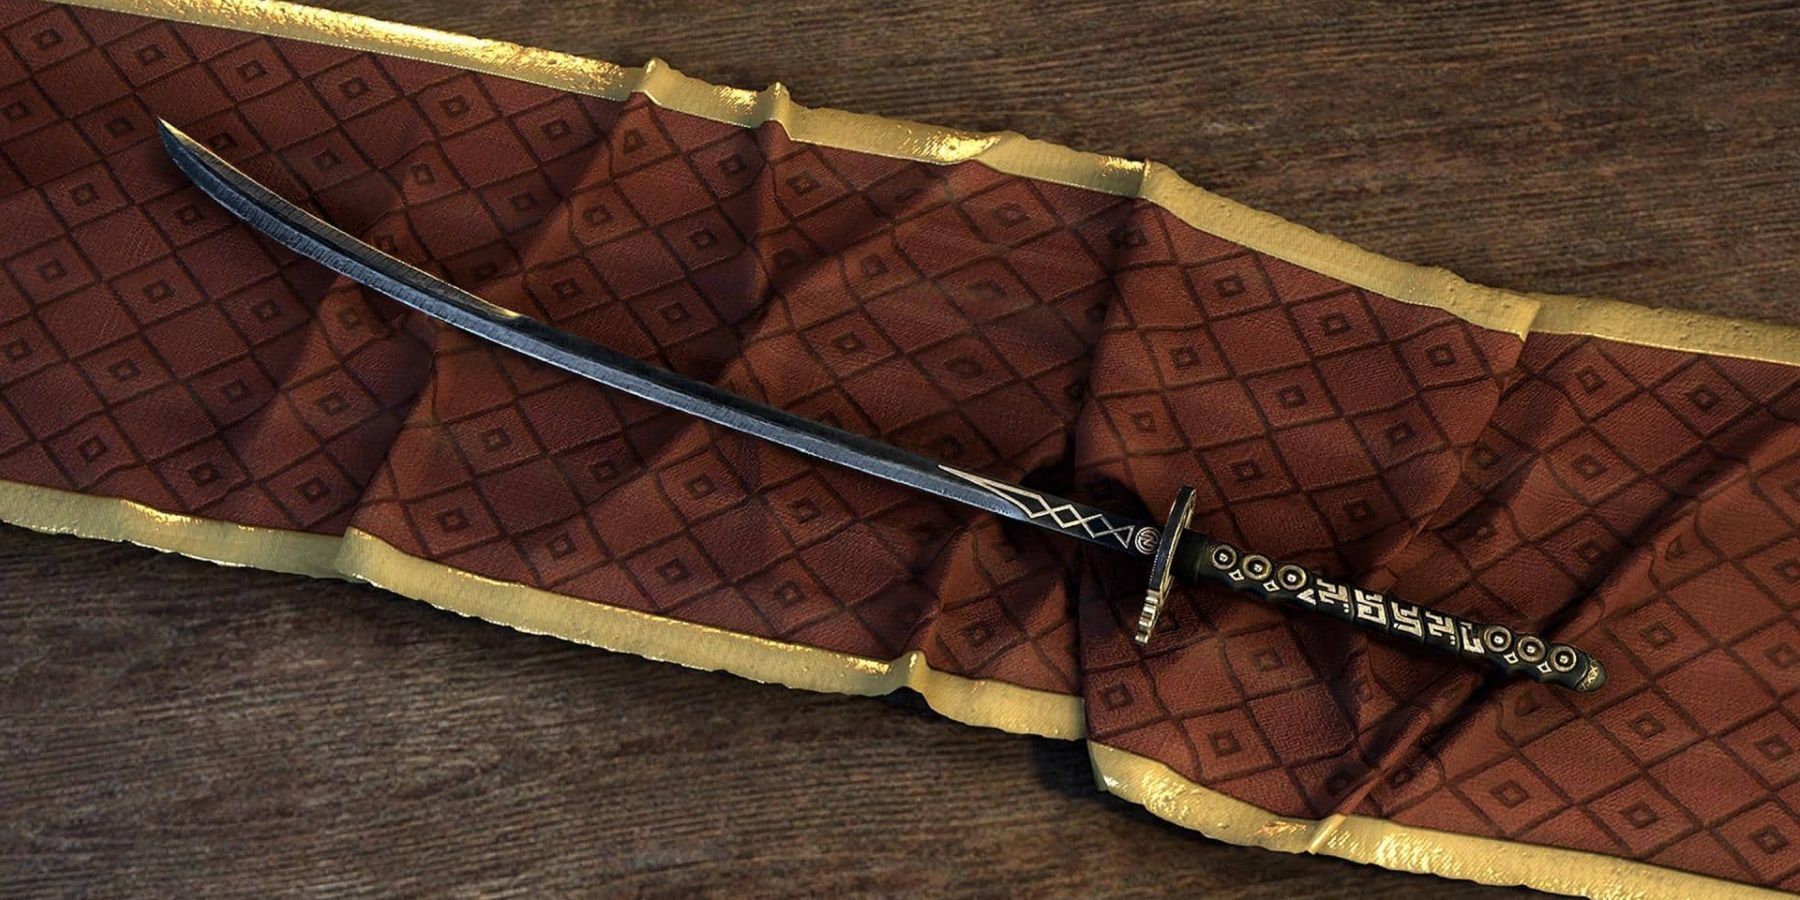 An image showing Skyrim's ebony blade on the floor.